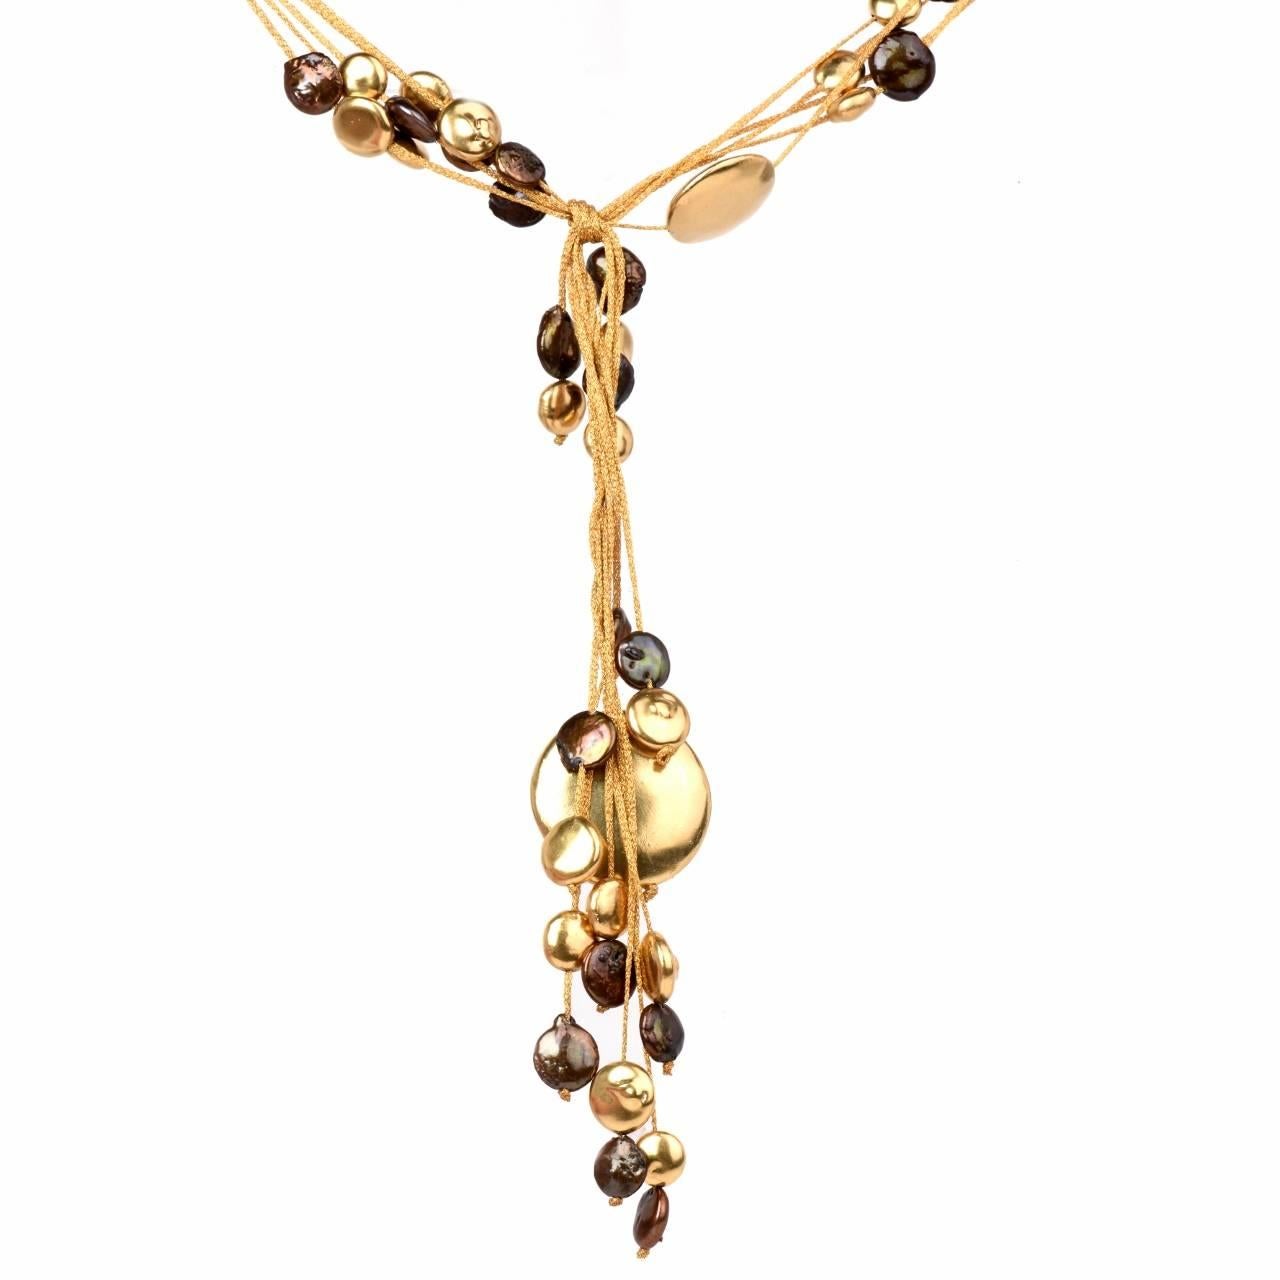 This dazzling  Italian 18K yellow gold drop necklace by designer 'Calgaro.' Featuring various solid 18k yellow gold mesh strands that are adorned with some  genuine very high lustrous  greenish golden brown  genuine pearls and  yellow genuine 18k